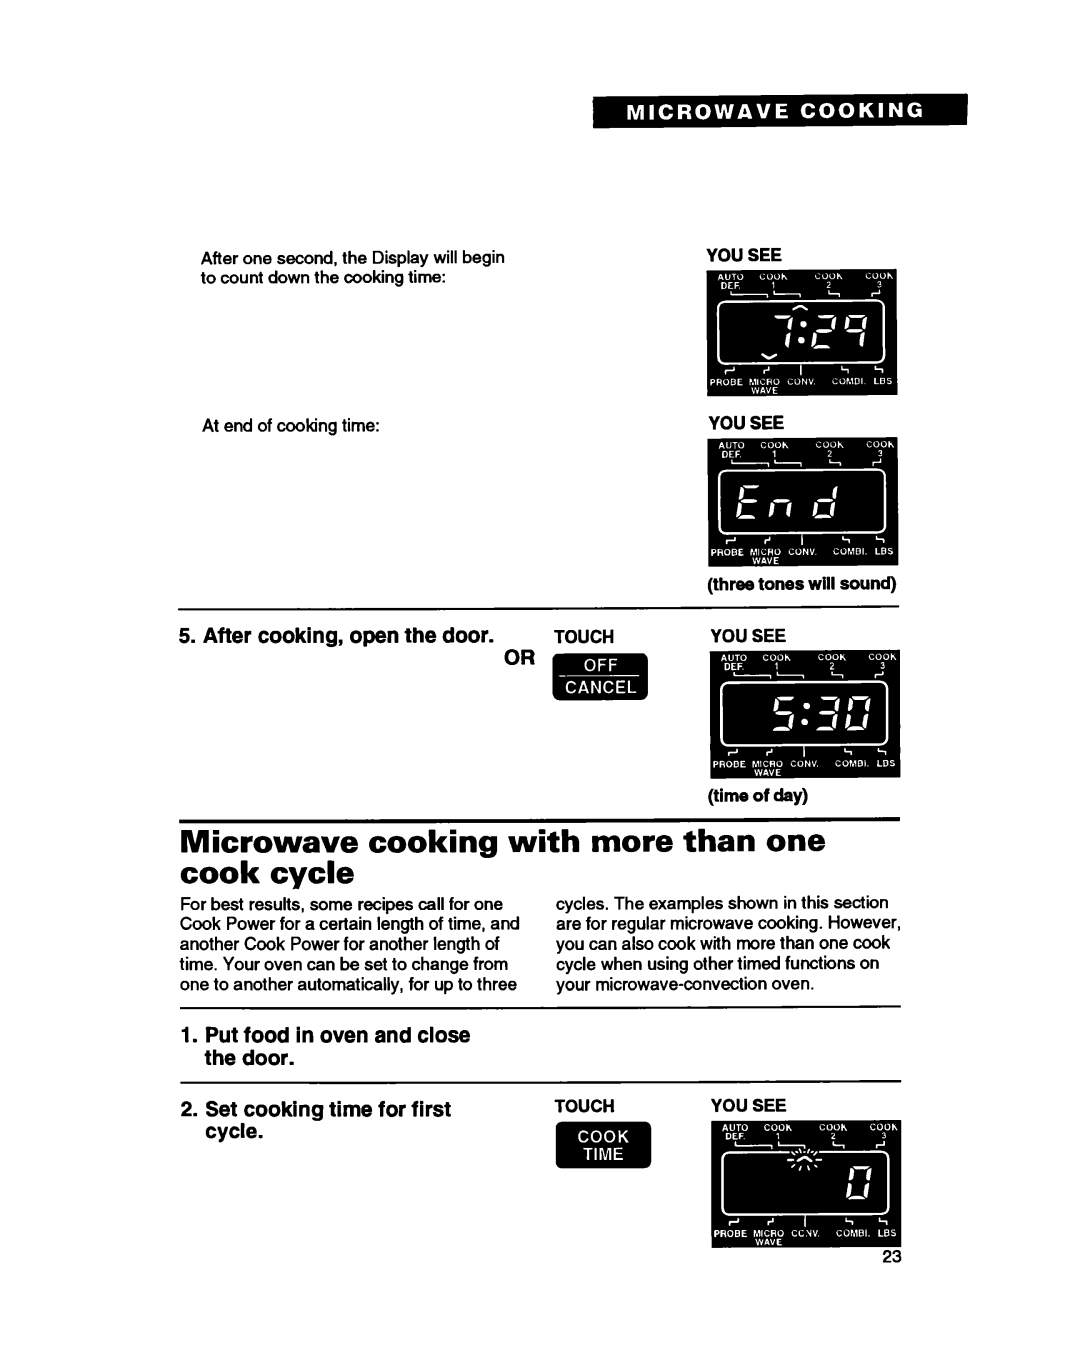 Whirlpool MC8130XA Microwave cooking with more than one cook cycle, After cooking, open the door, three tones will sound 